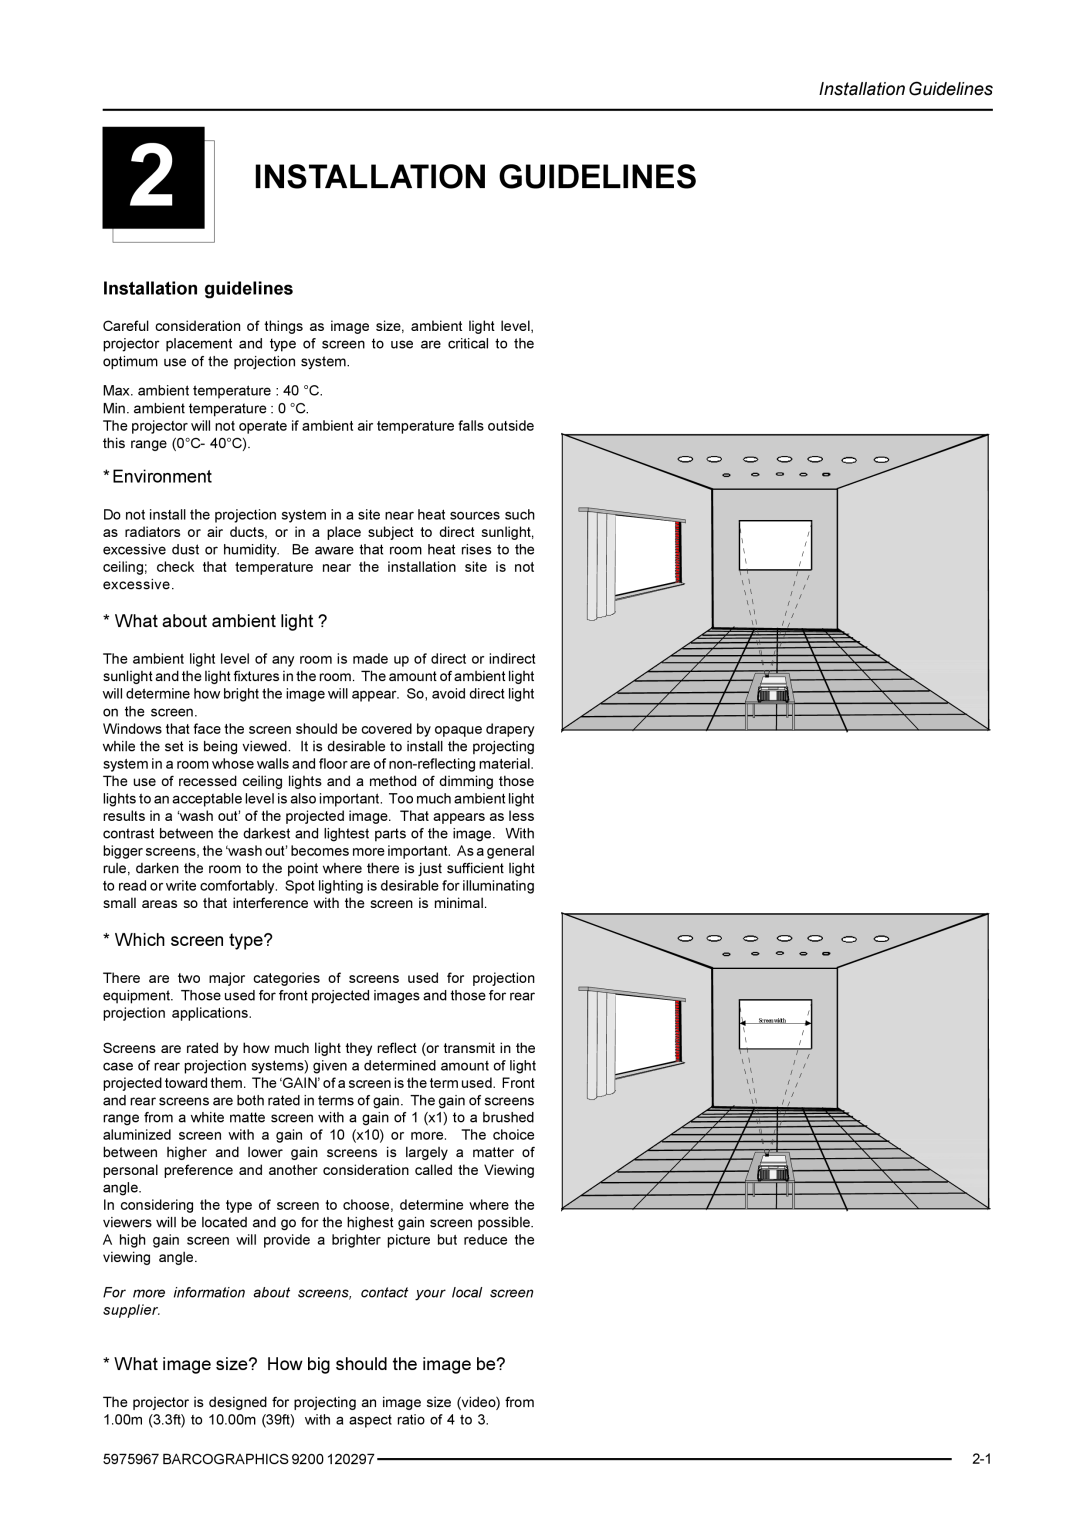 Barco 9200 Installation Guidelines, Installation guidelines, Environment, What about ambient light ?, Which screen type? 